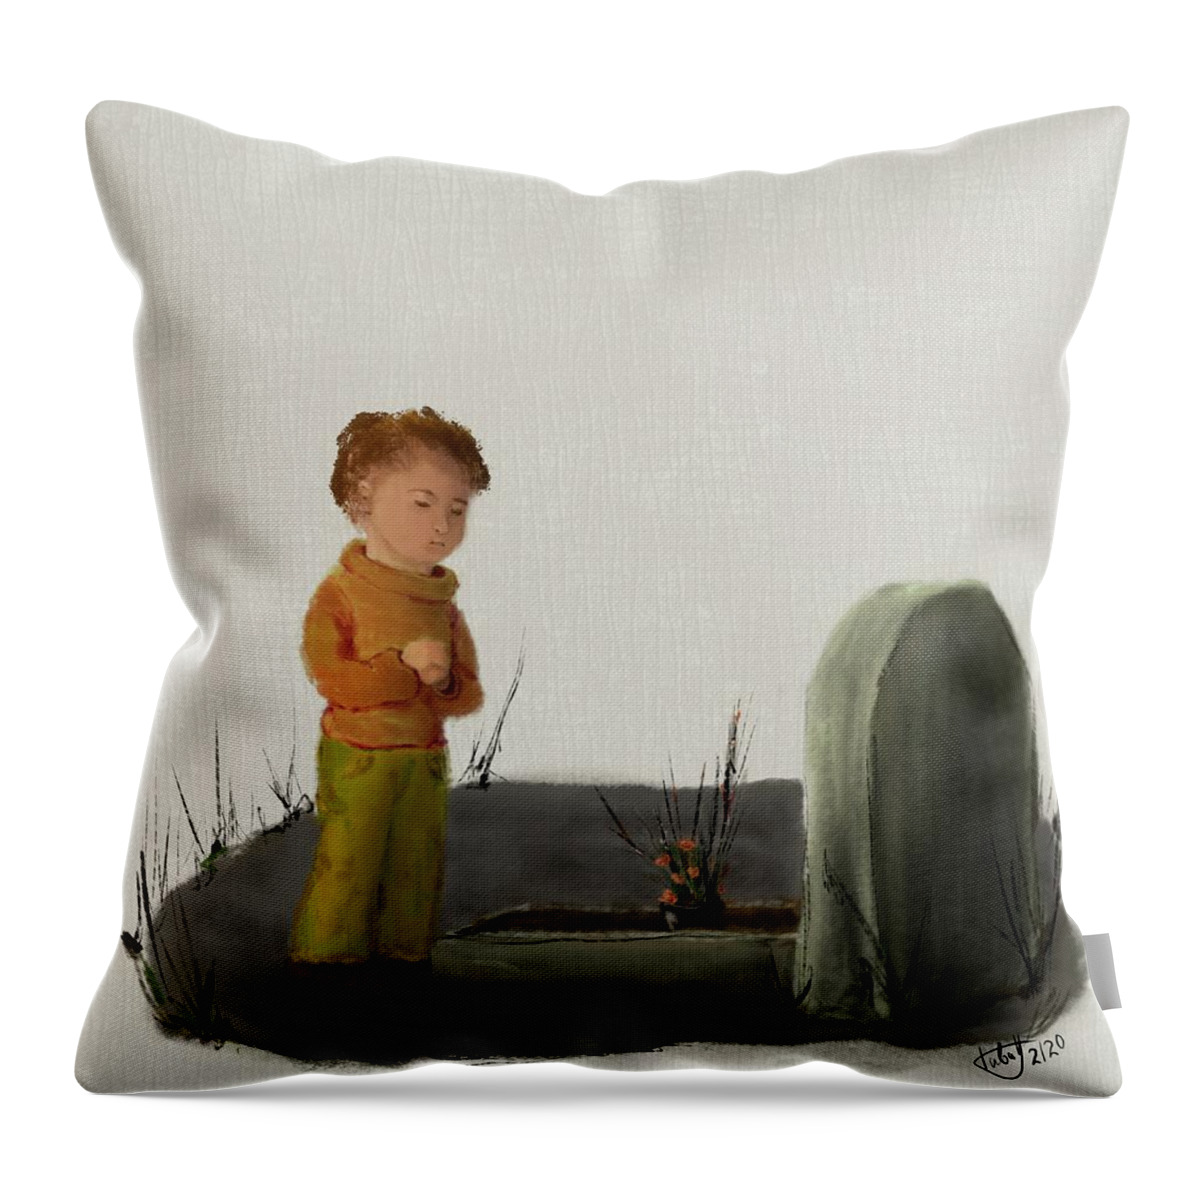 Visitor Throw Pillow featuring the digital art The Little Visitor by Mandy Tabatt